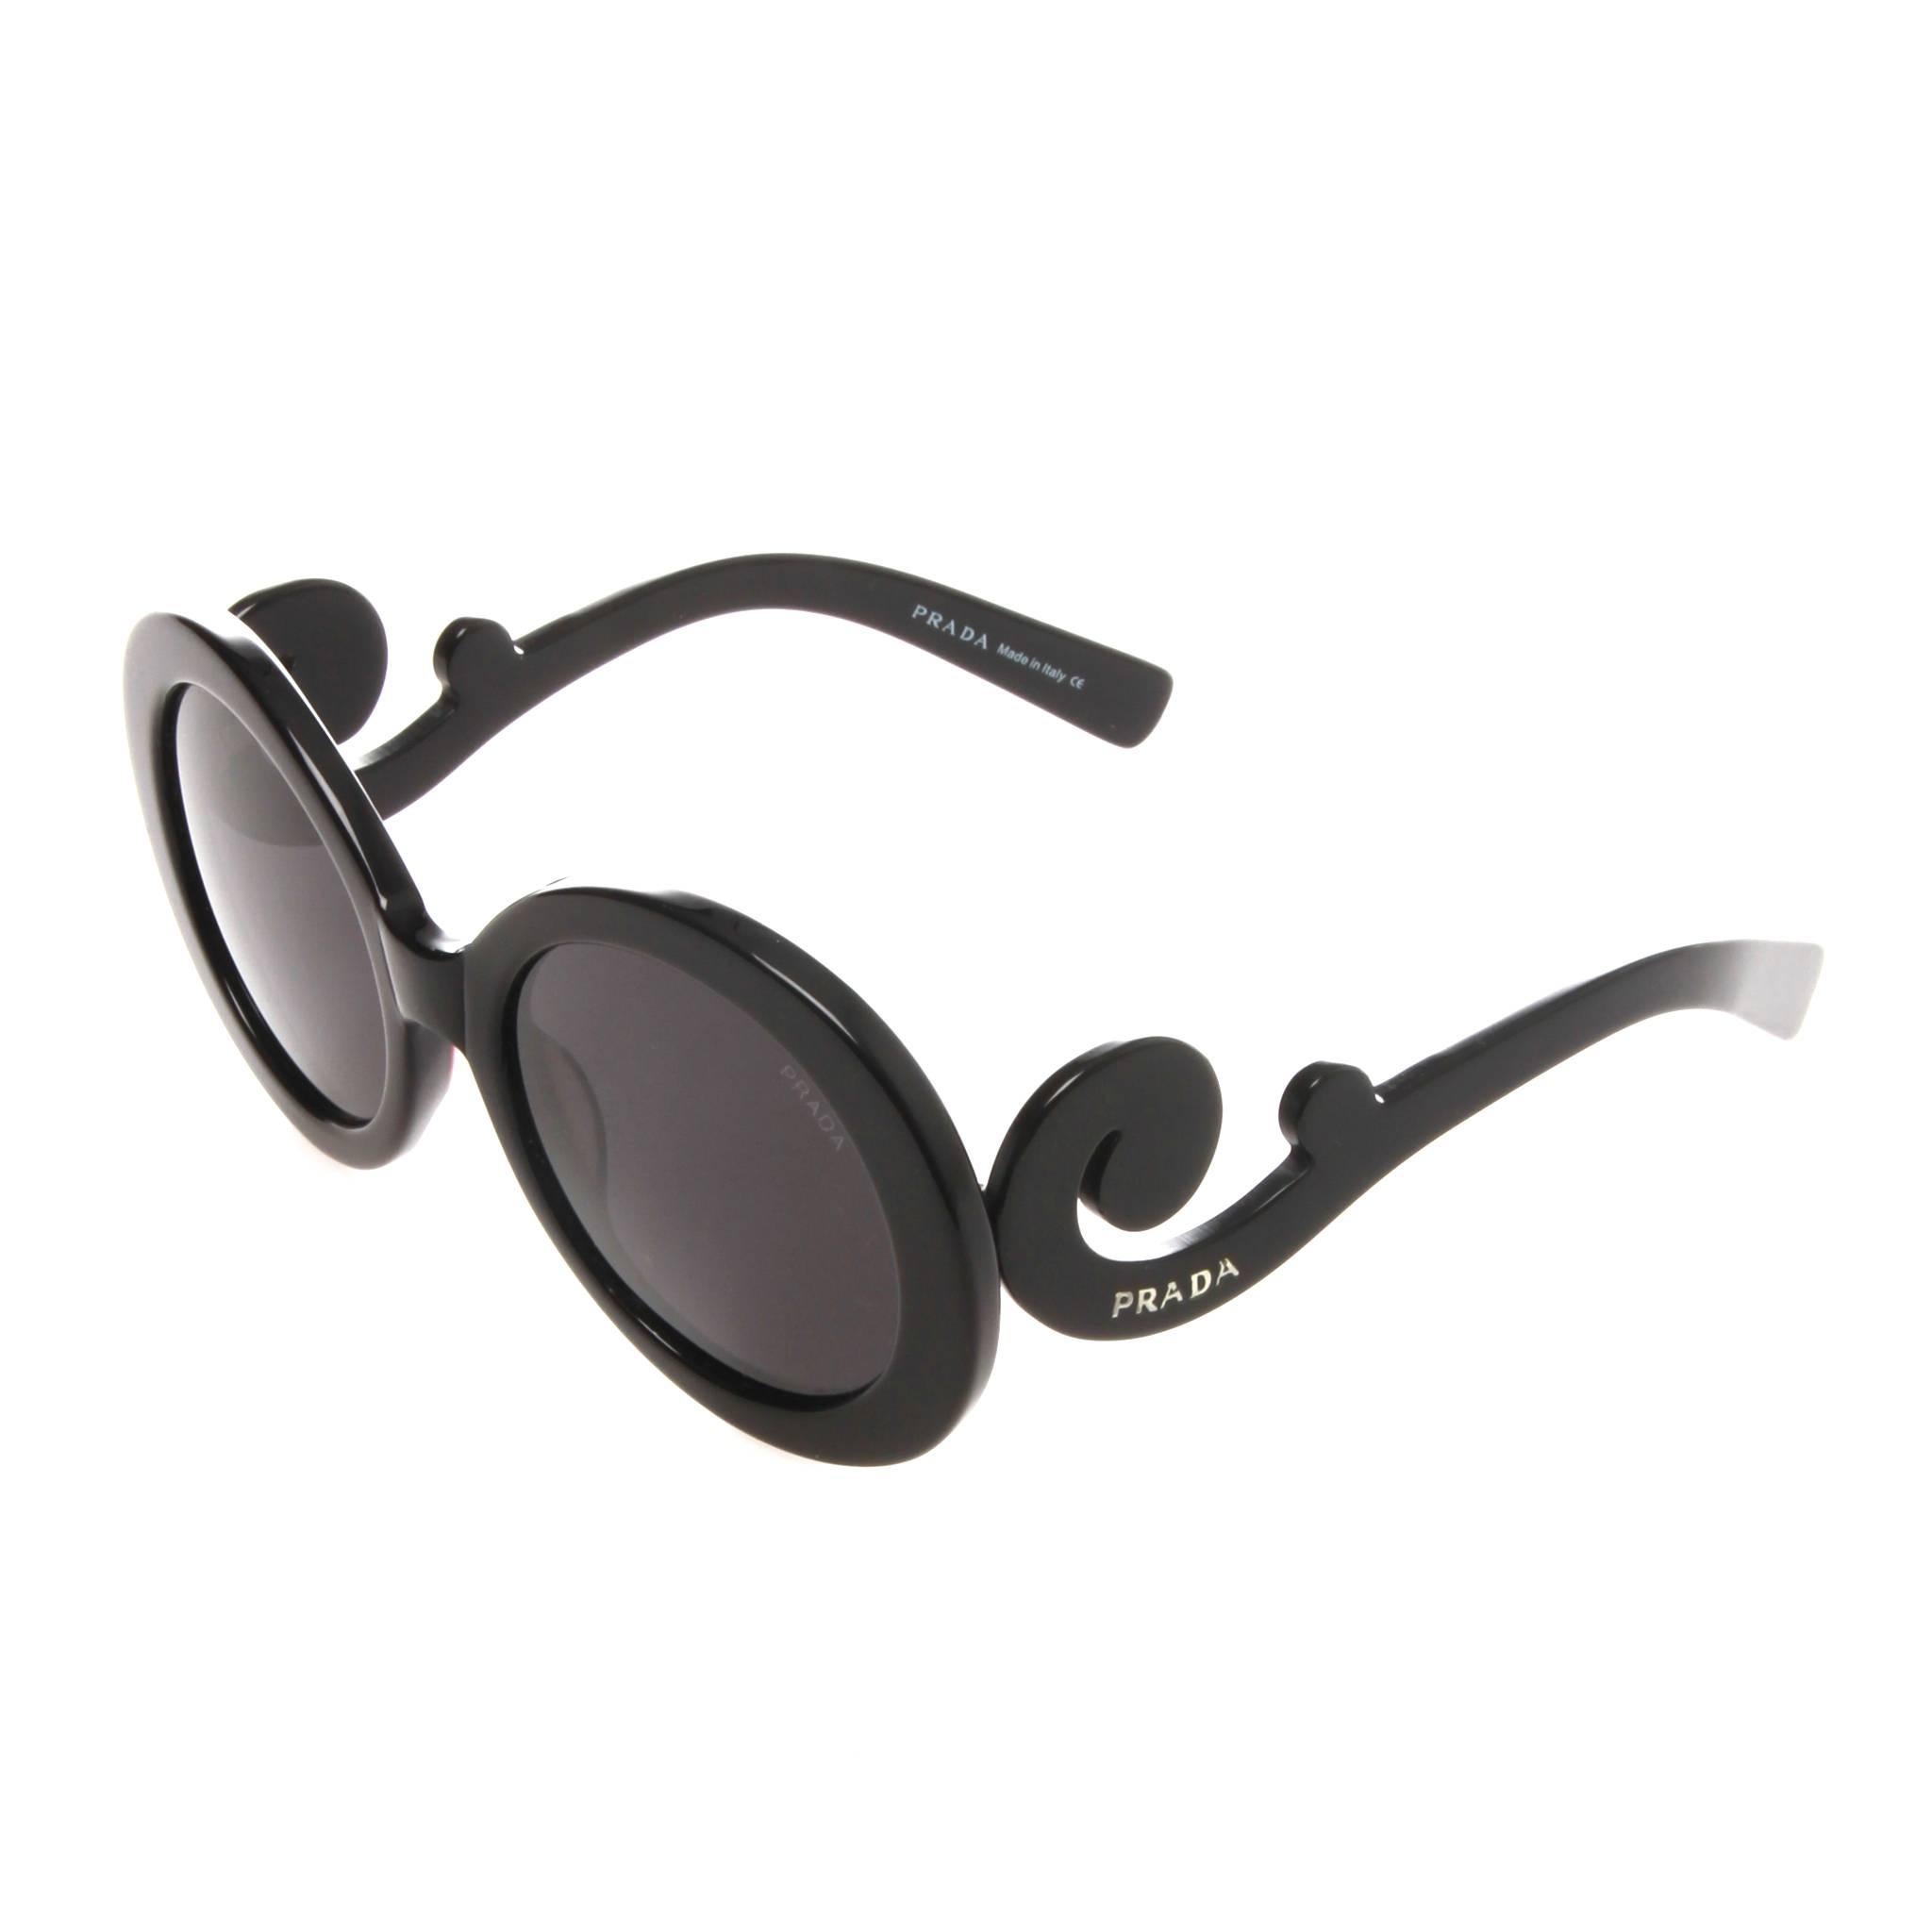 Black acetate Prada Baroque oversize round sunglasses with grey gradient lenses and baroque details at temples featuring silver-tone logo accent. Includes case.